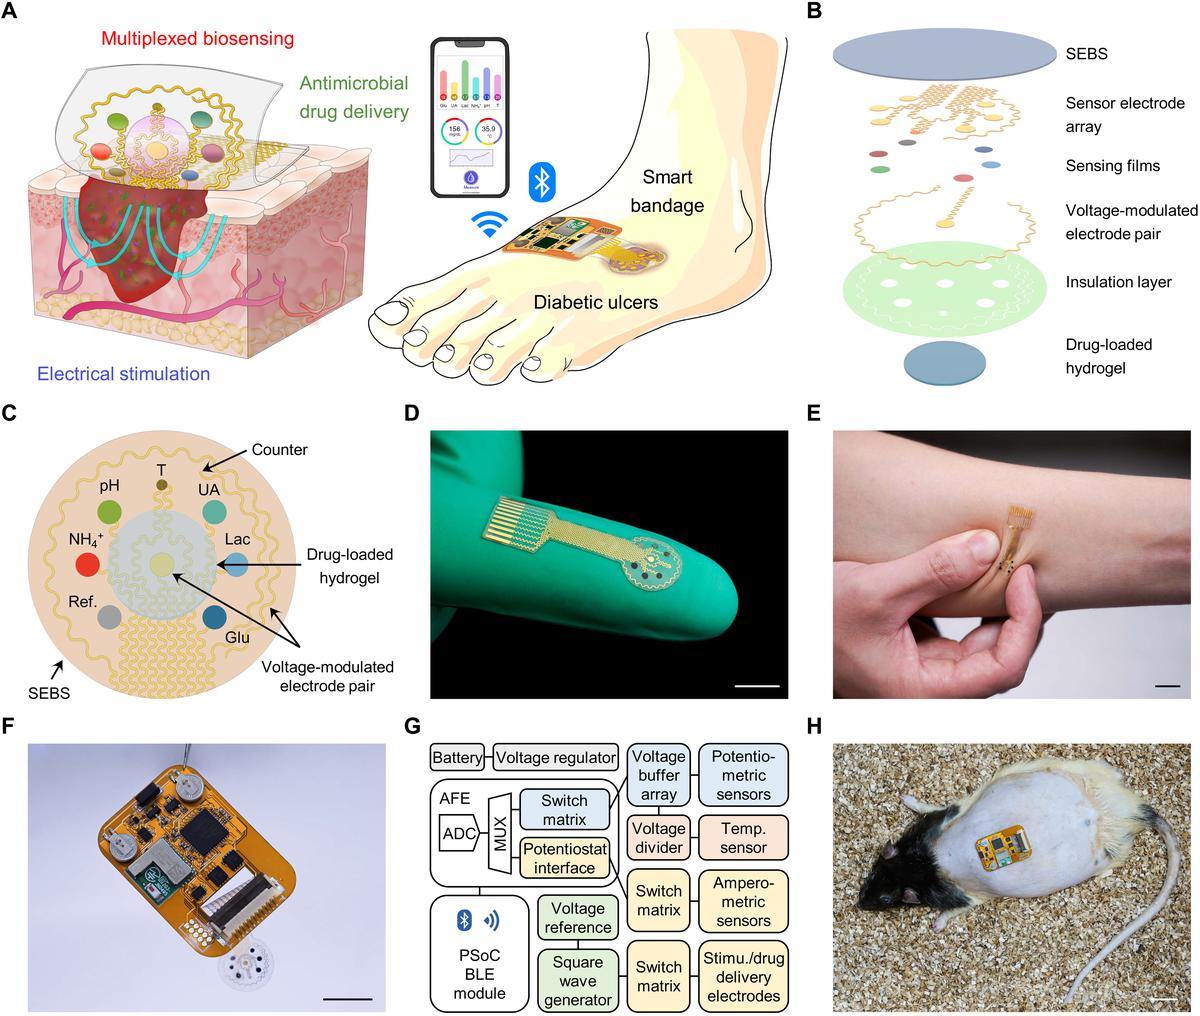 (A) Schematic of a soft wearable patch on an infected chronic wound on a diabetic foot. (B) Schematic of layer assembly of the wearable patch. (C) Schematic layout of the smart patch consisting of various sensors and electrodes. (D, E) The flexible wearable patch (scale bars 1 cm). (F, G) Schematic diagram (F) and photo (G) of the miniaturised wireless wearable patch. (H) Photo of the fully integrated patch on a diabetic rat with an open wound (scale bar 2 cm).